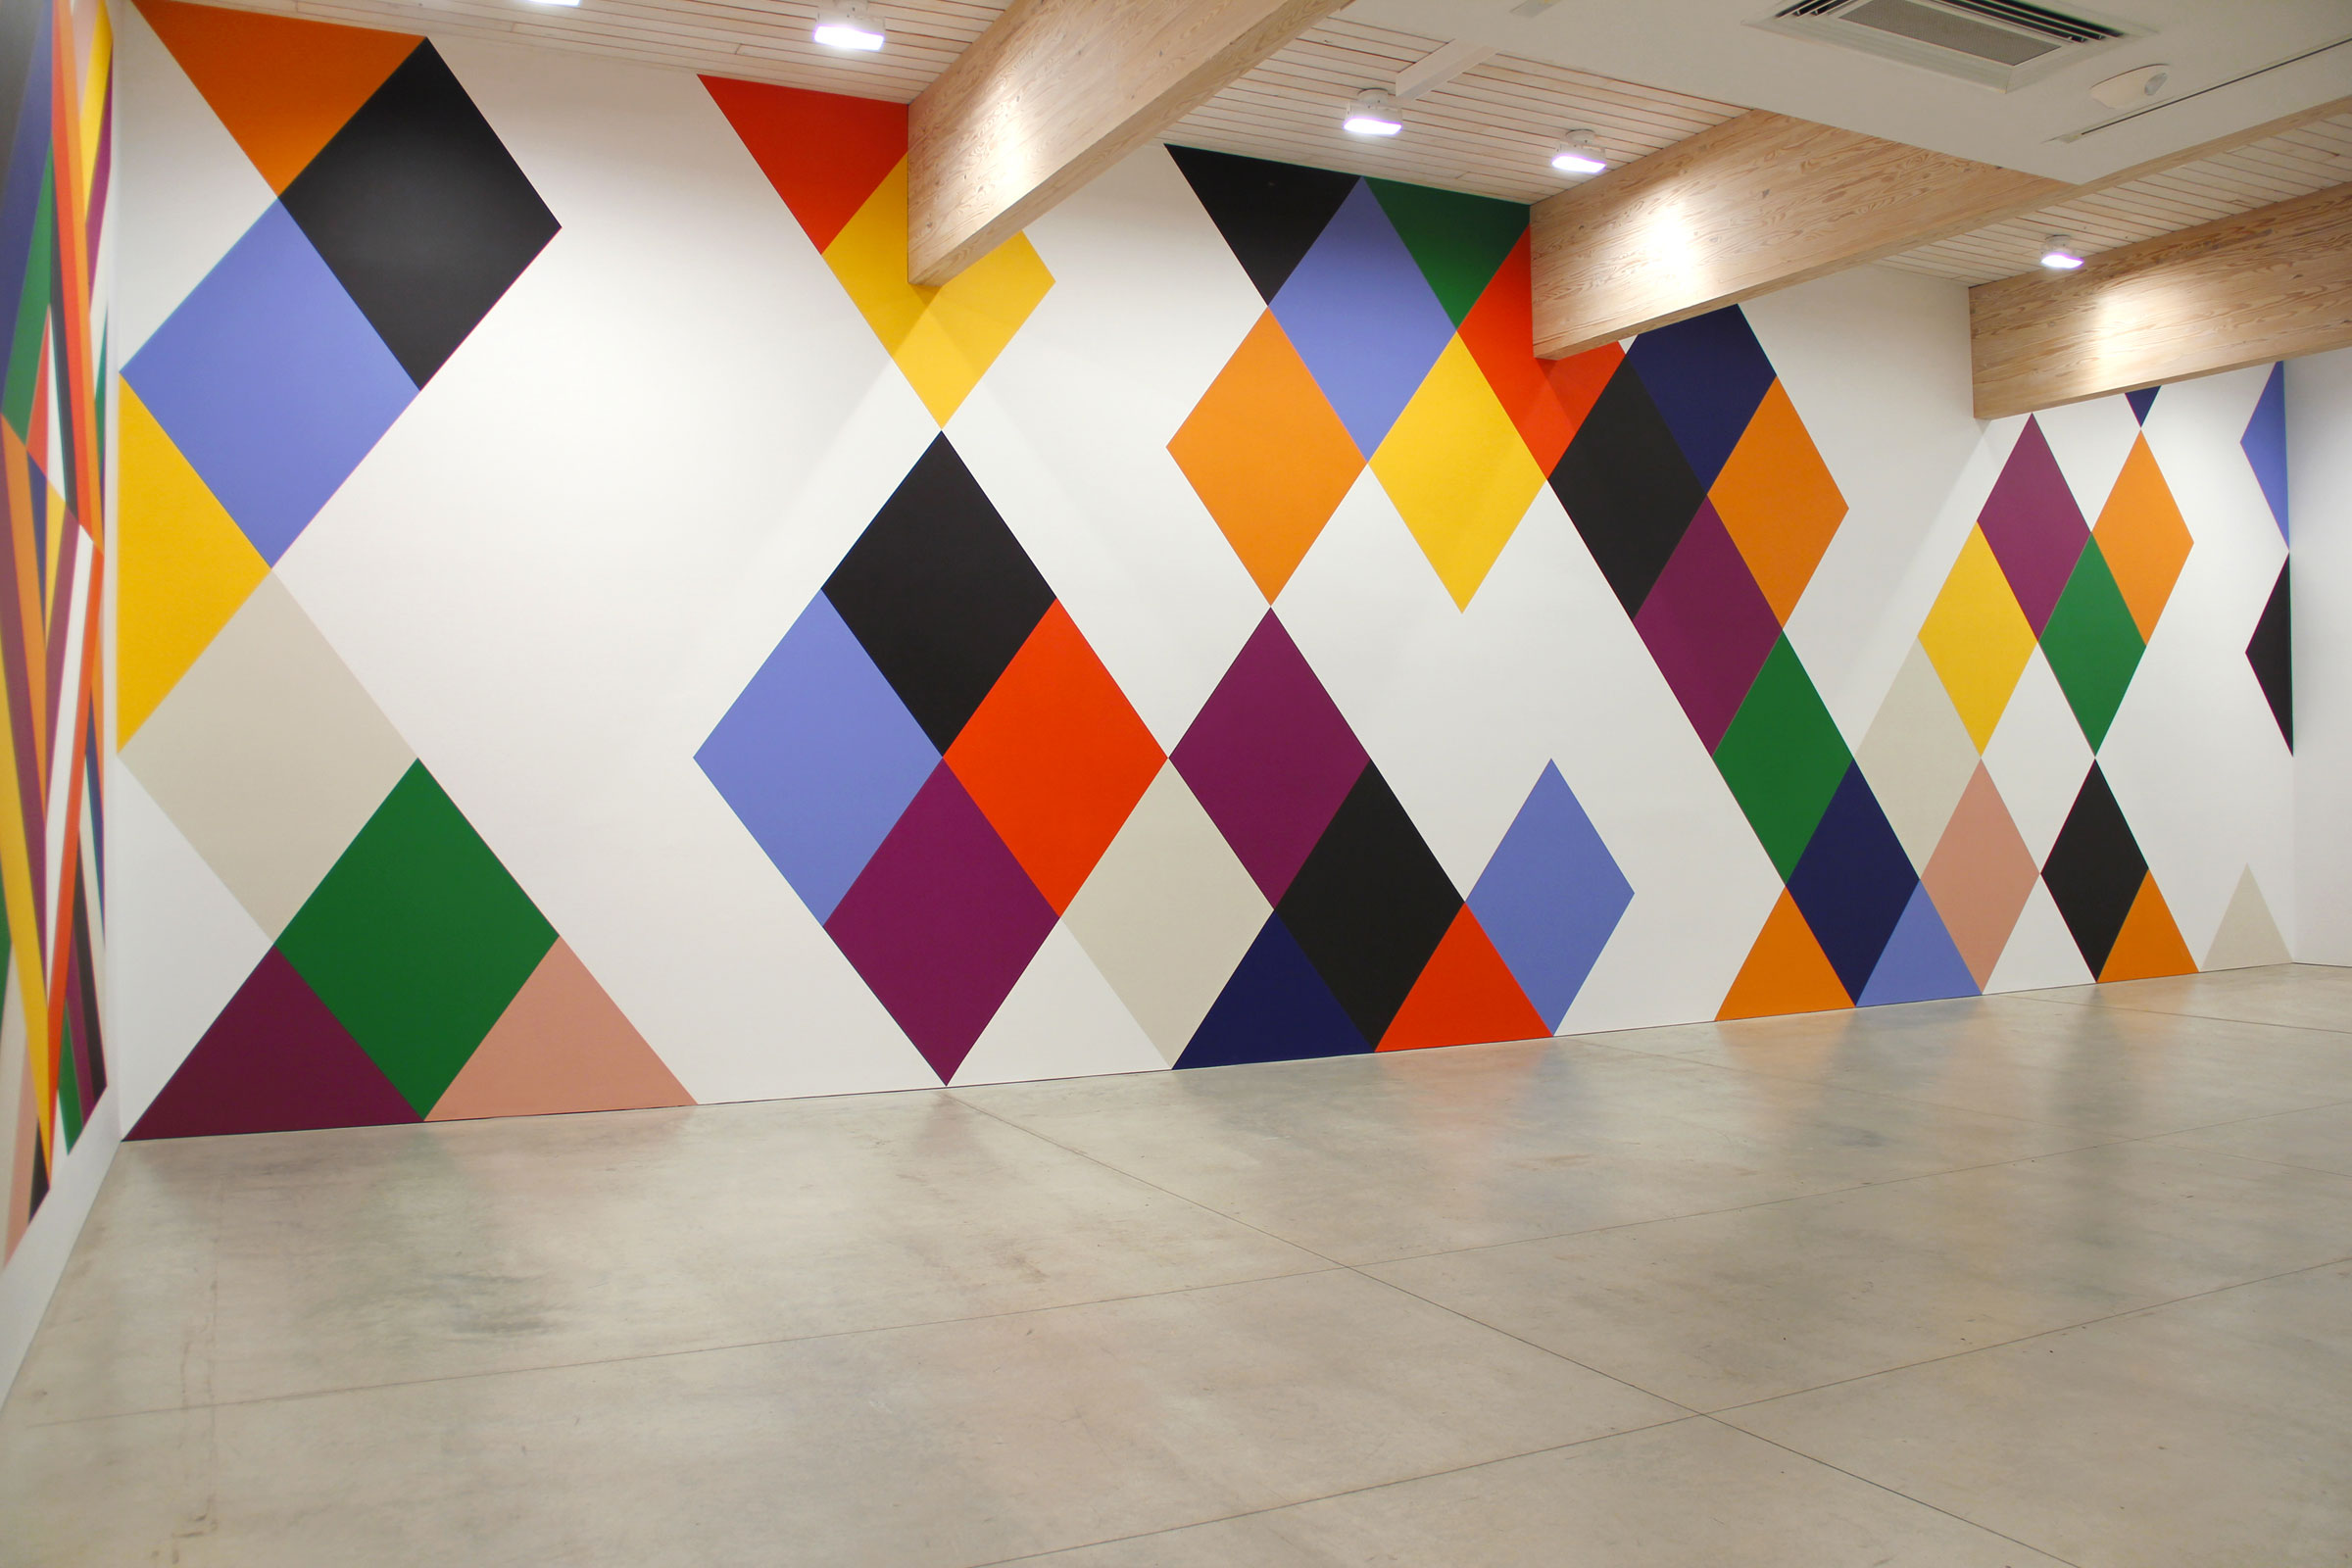   Oracle , 2014, 13 x 26’, wall painting  Canterbury , 2014, 15 x 75’, wall painting OMI International Arts Center, Ghent, New York.&nbsp;On view June-September 2014. 